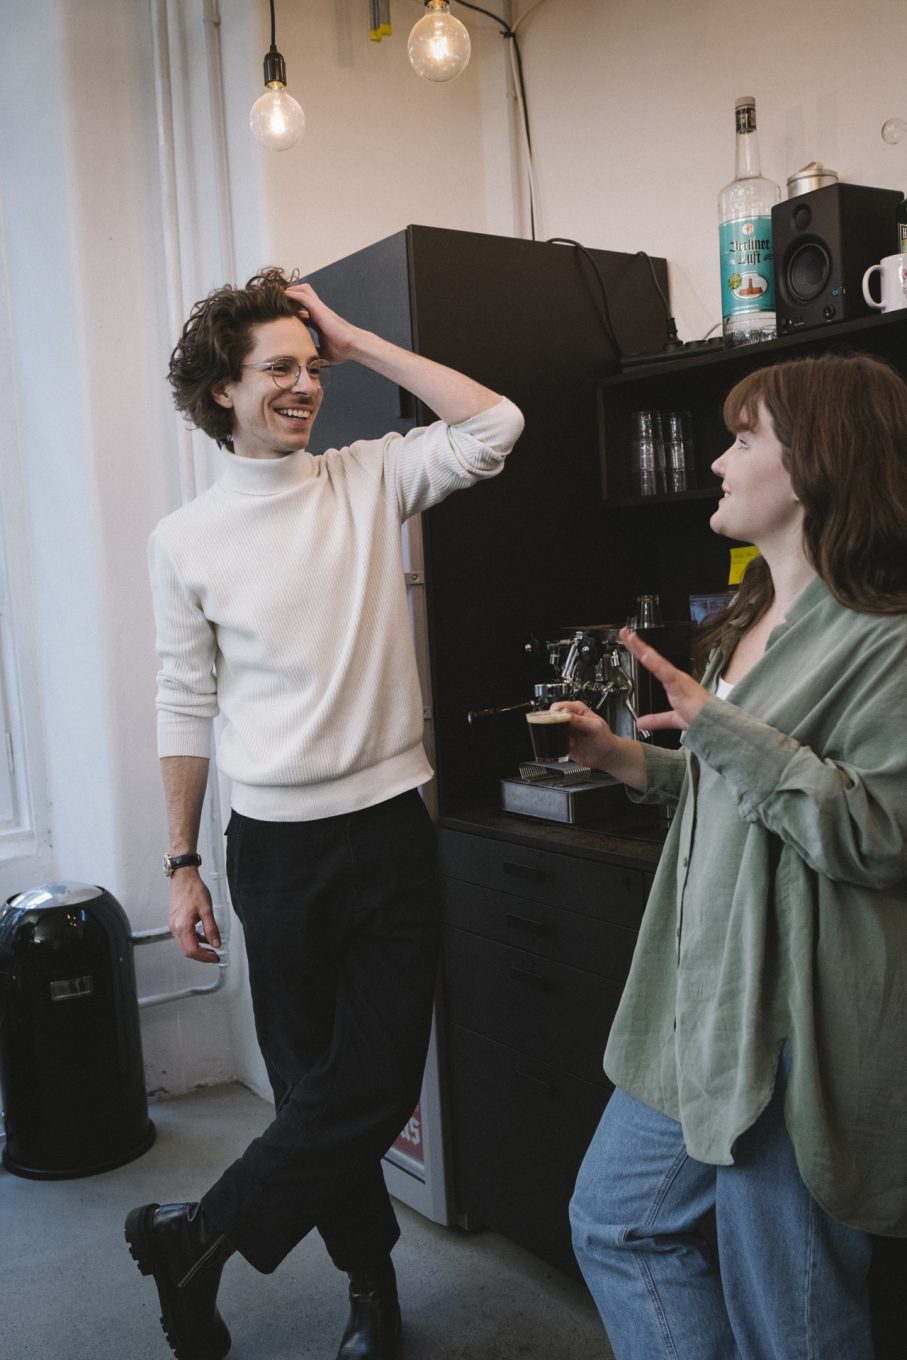 Man and woman talking in a kitchen with coffee 